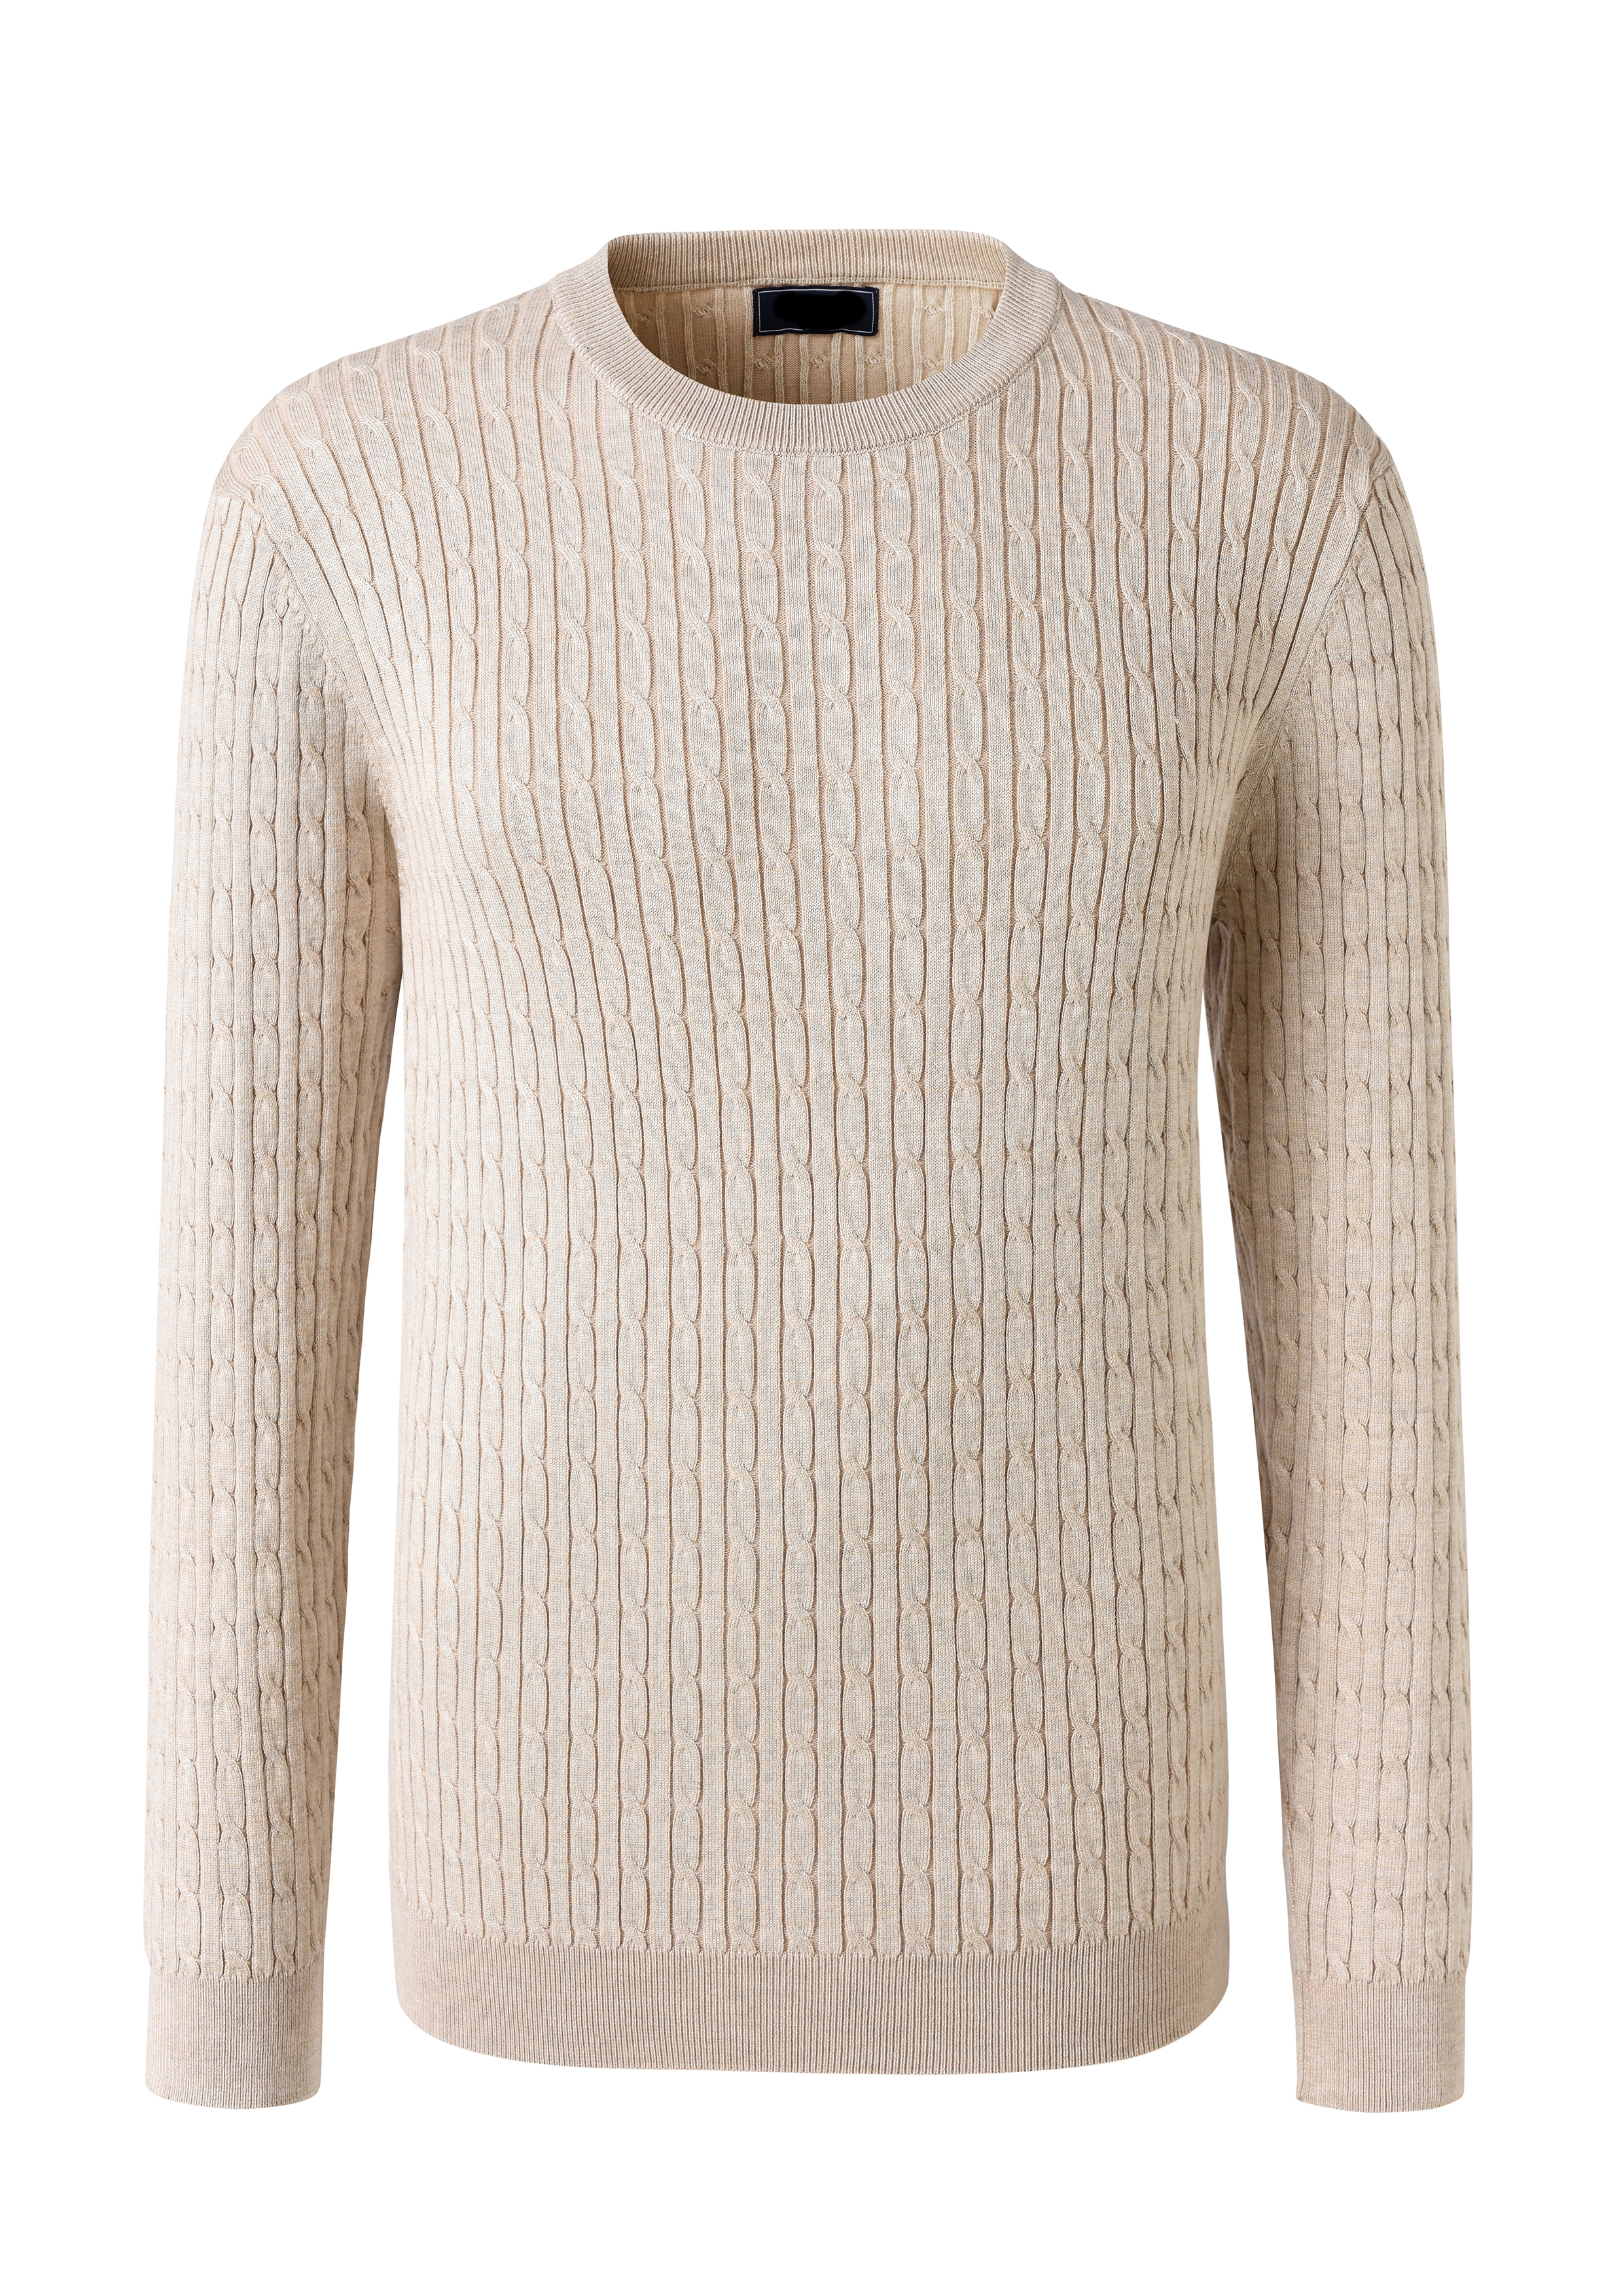 OEM Service White Knitted Long Sleeve Men\'s Casual Sweater Crewneck Pullovers Sweater